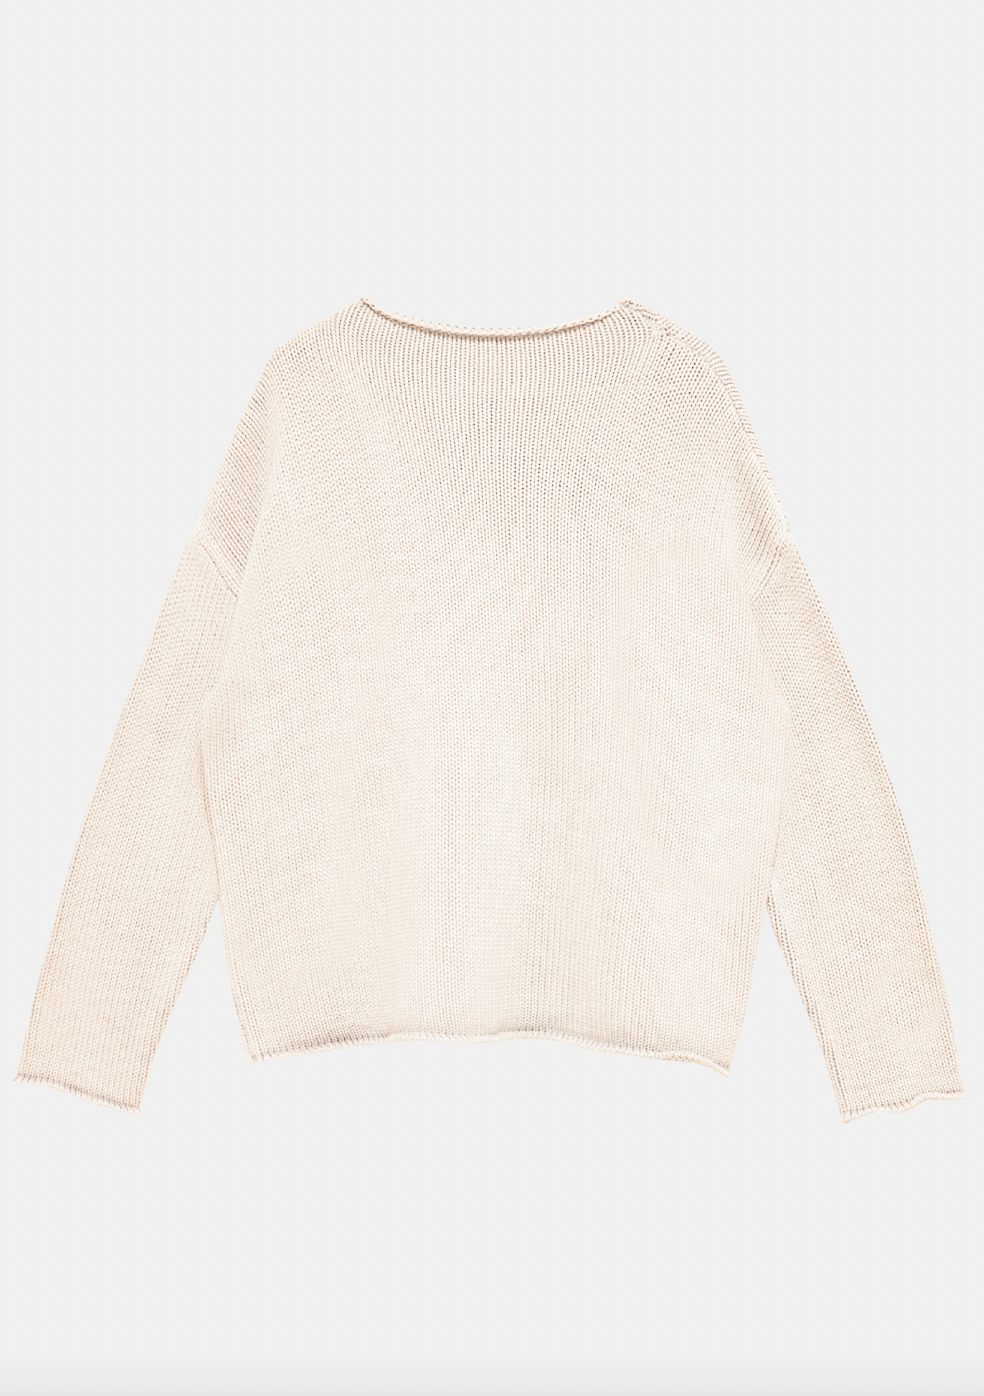 Lamis Sweater, Off White